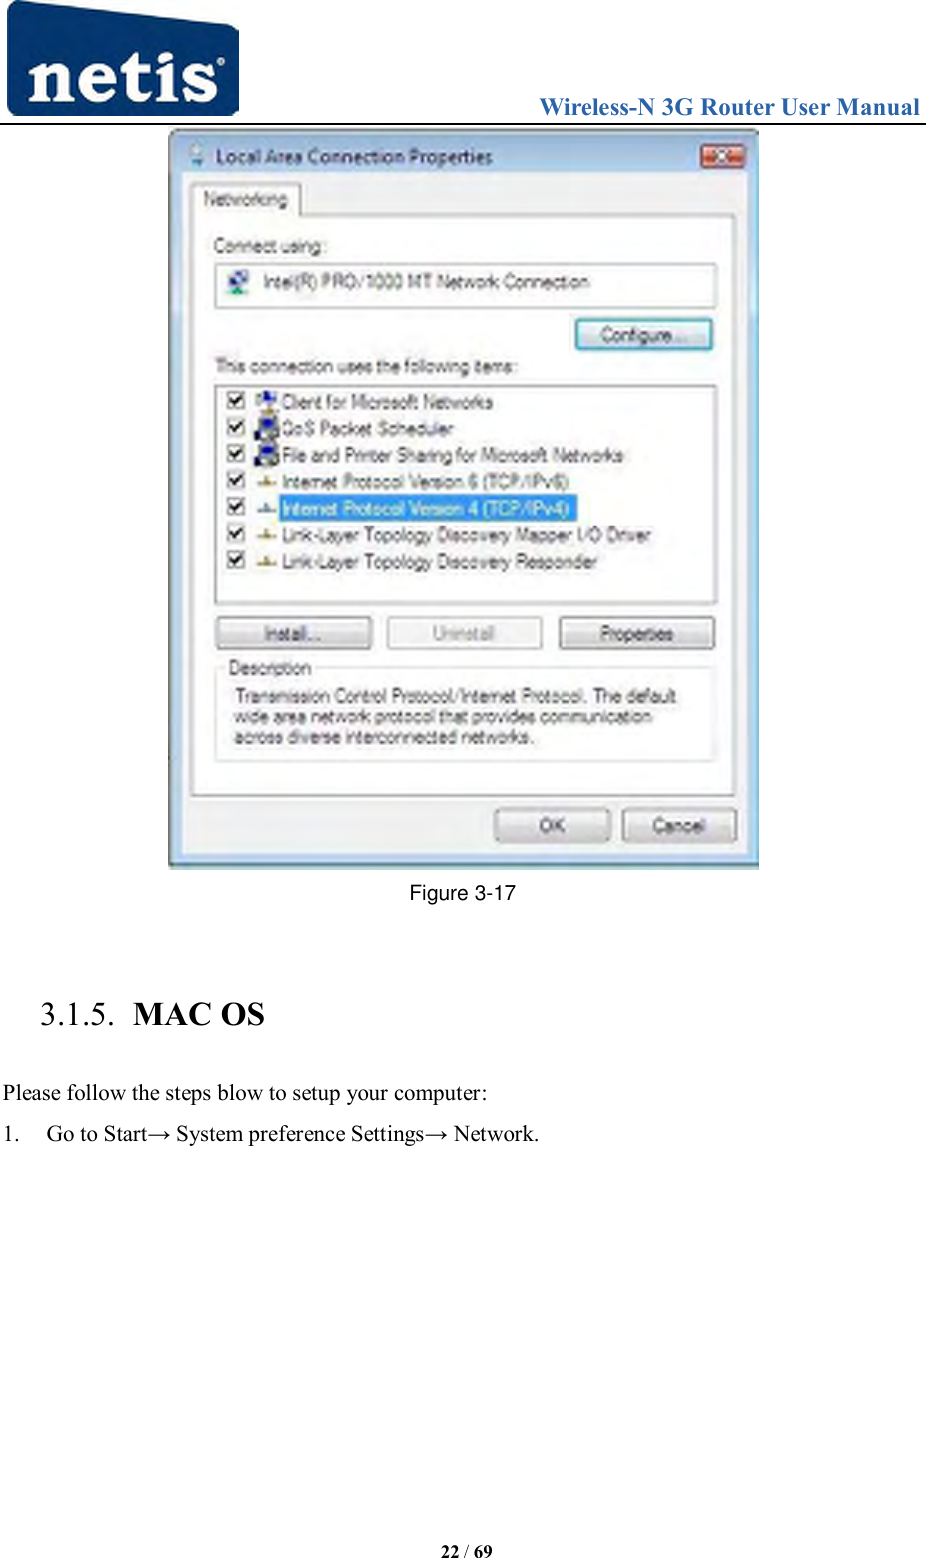                                 Wireless-N 3G Router User Manual  22 / 69  Figure 3-17  3.1.5. MAC OS Please follow the steps blow to setup your computer: 1. Go to Start→ System preference Settings→ Network. 